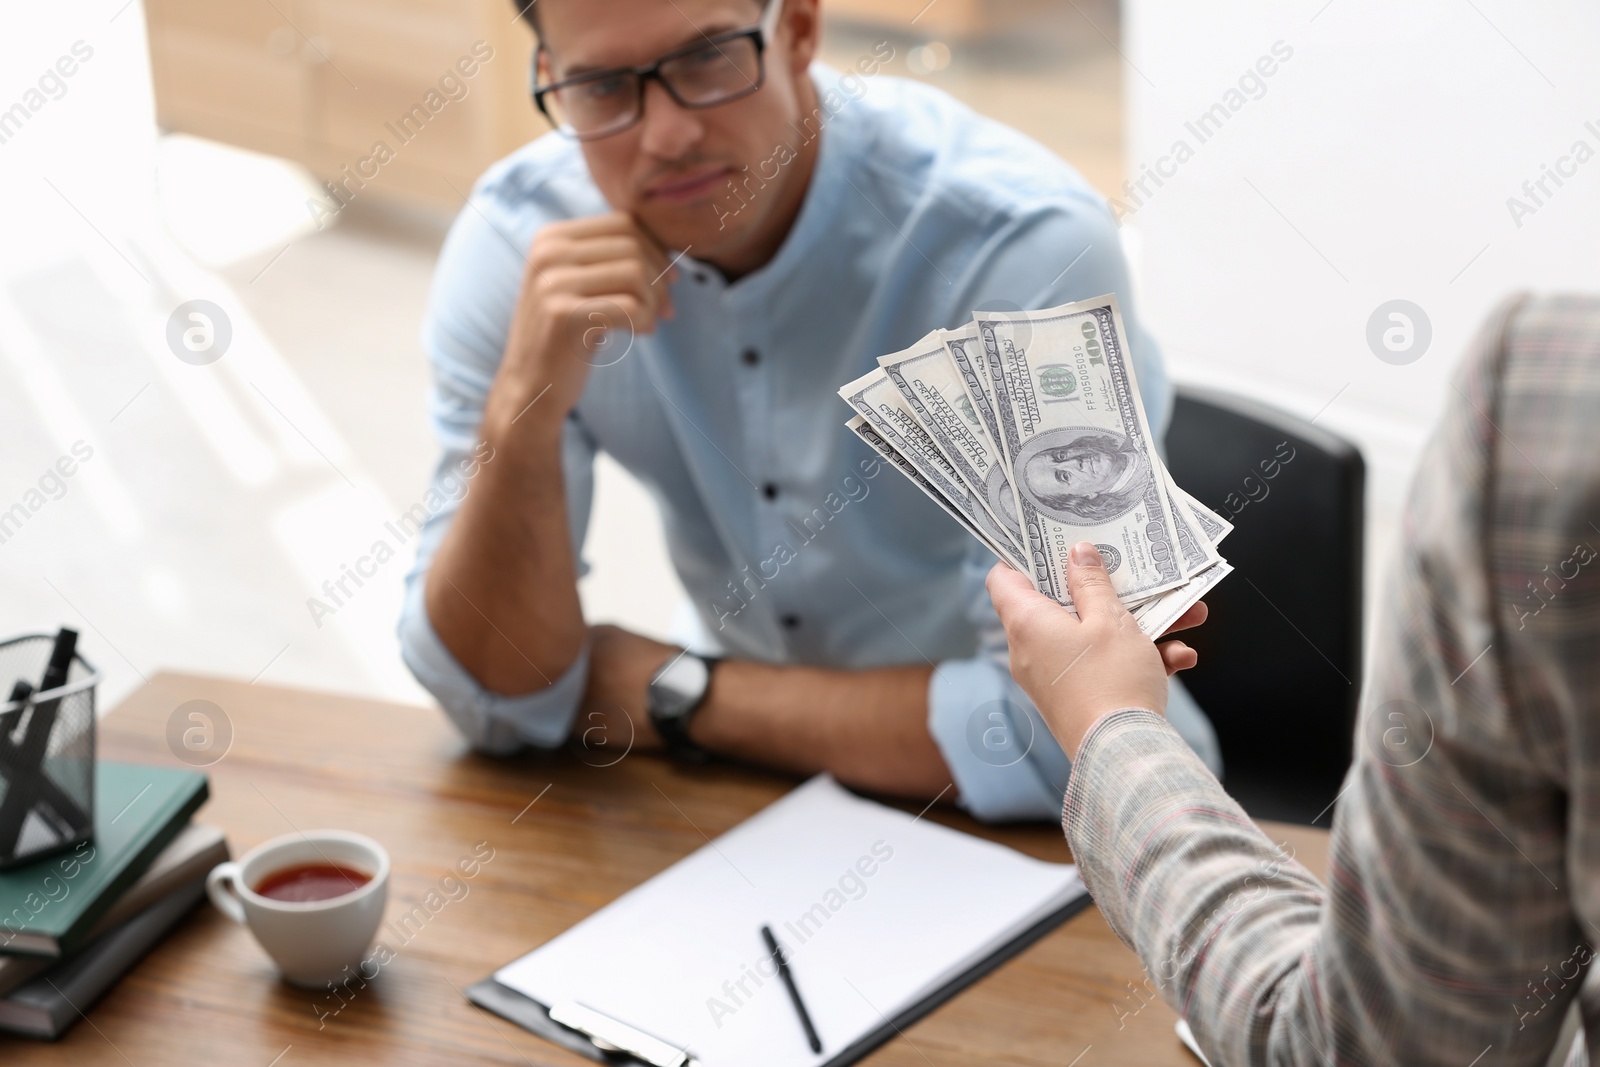 Photo of Woman offering bribe money to man at table, closeup